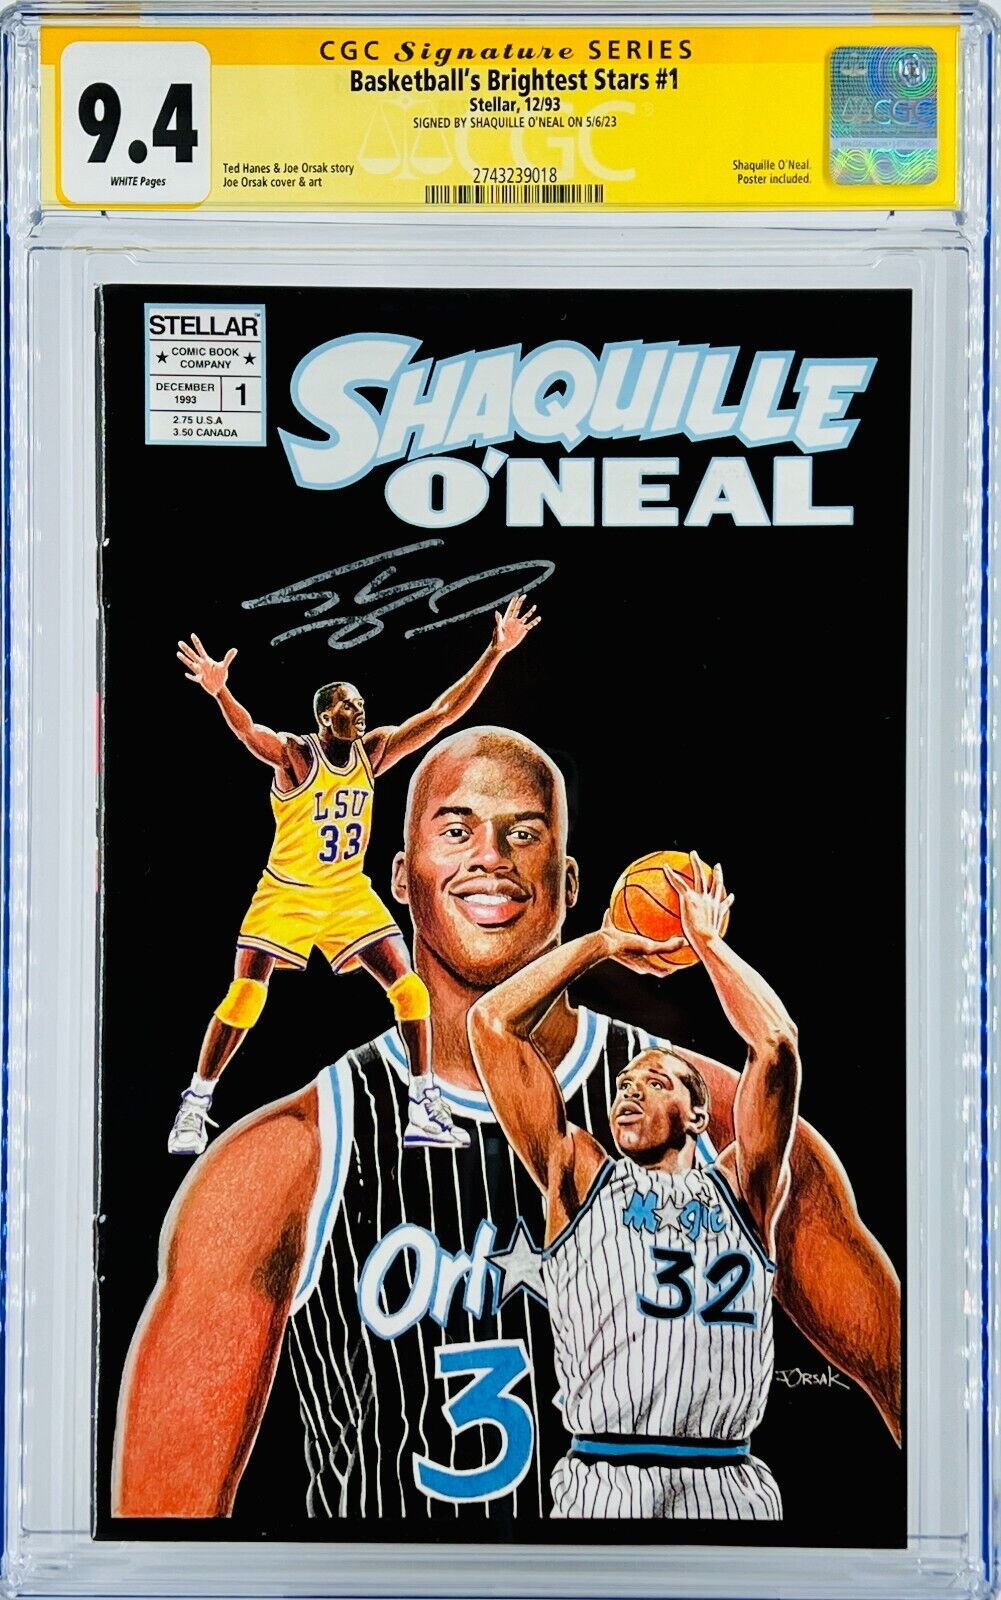 Shaquille O'Neal Signed CGC SS Basketball's Brightest Stars #1 Stellar Grade 9.4